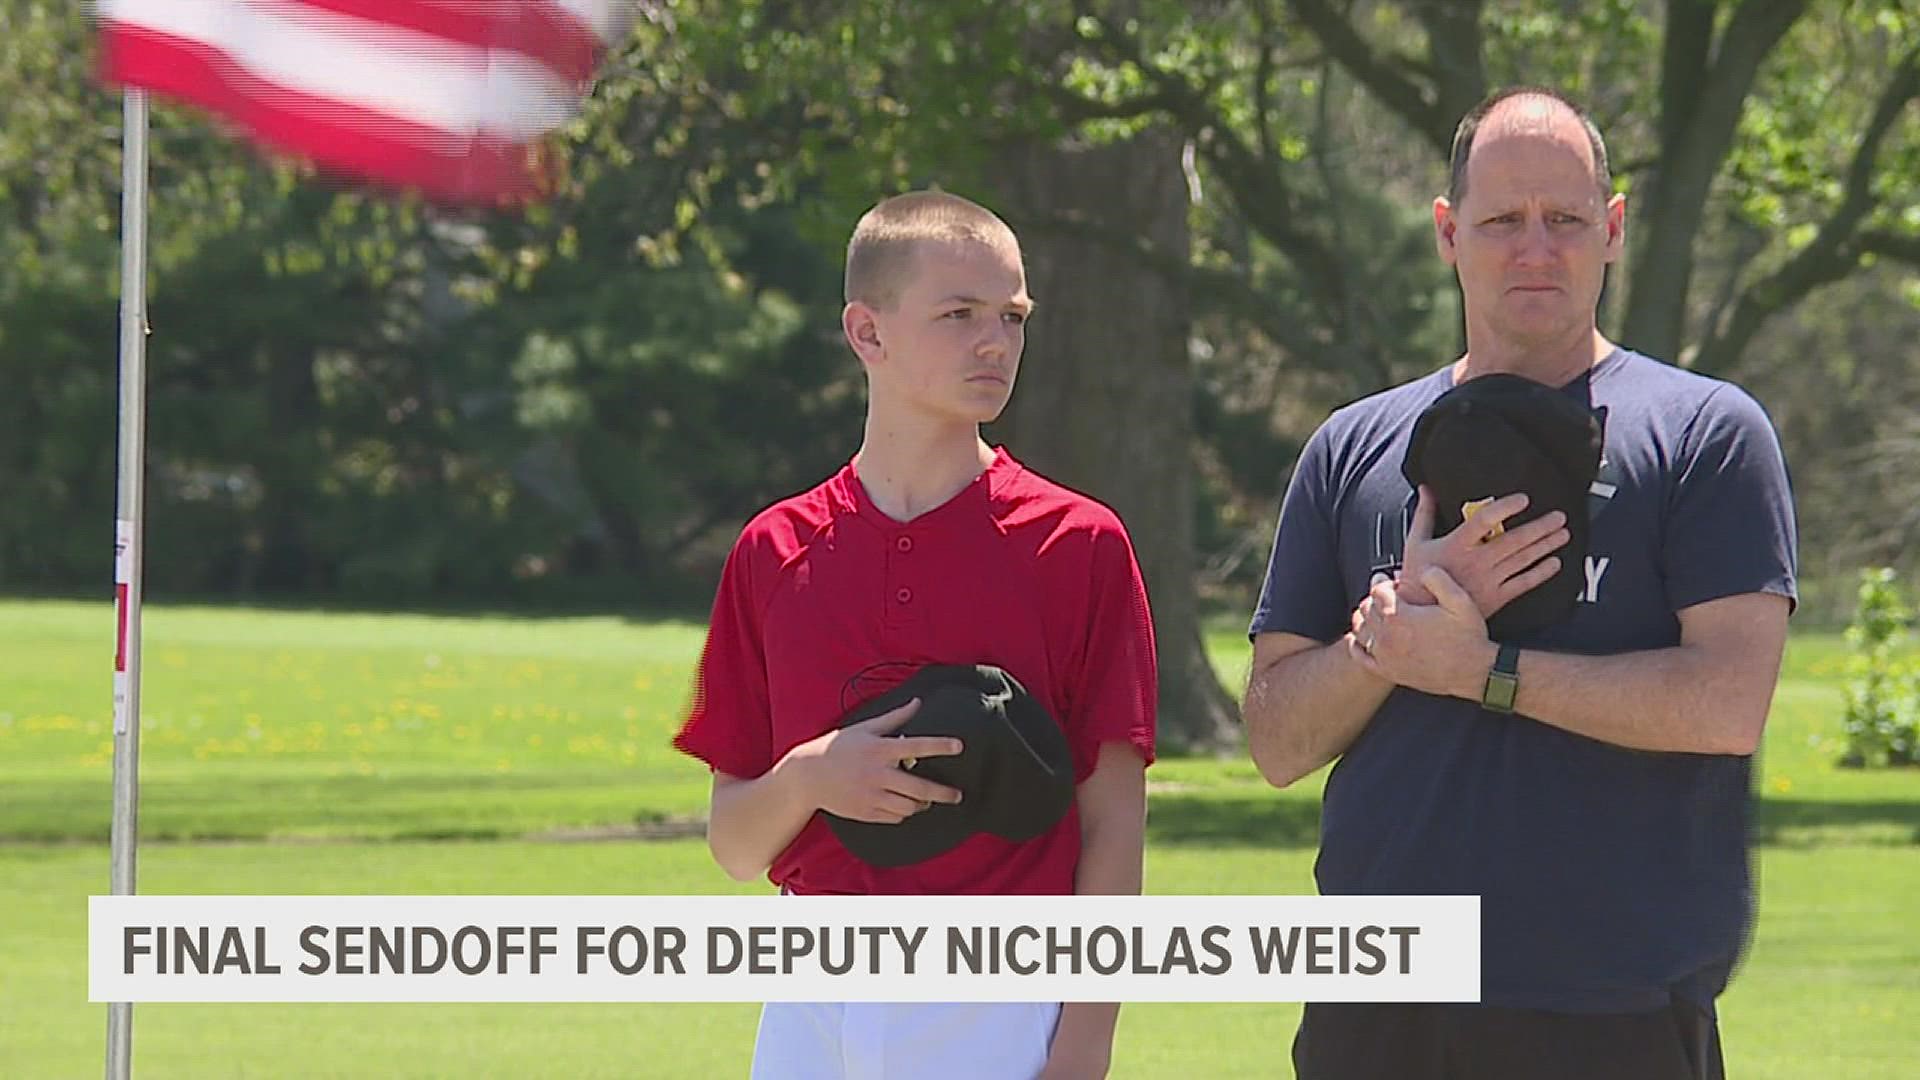 A public memorial was held Saturday for Knox County Sheriff's Deputy Nicholas Weist who died in the line of duty on April 29.